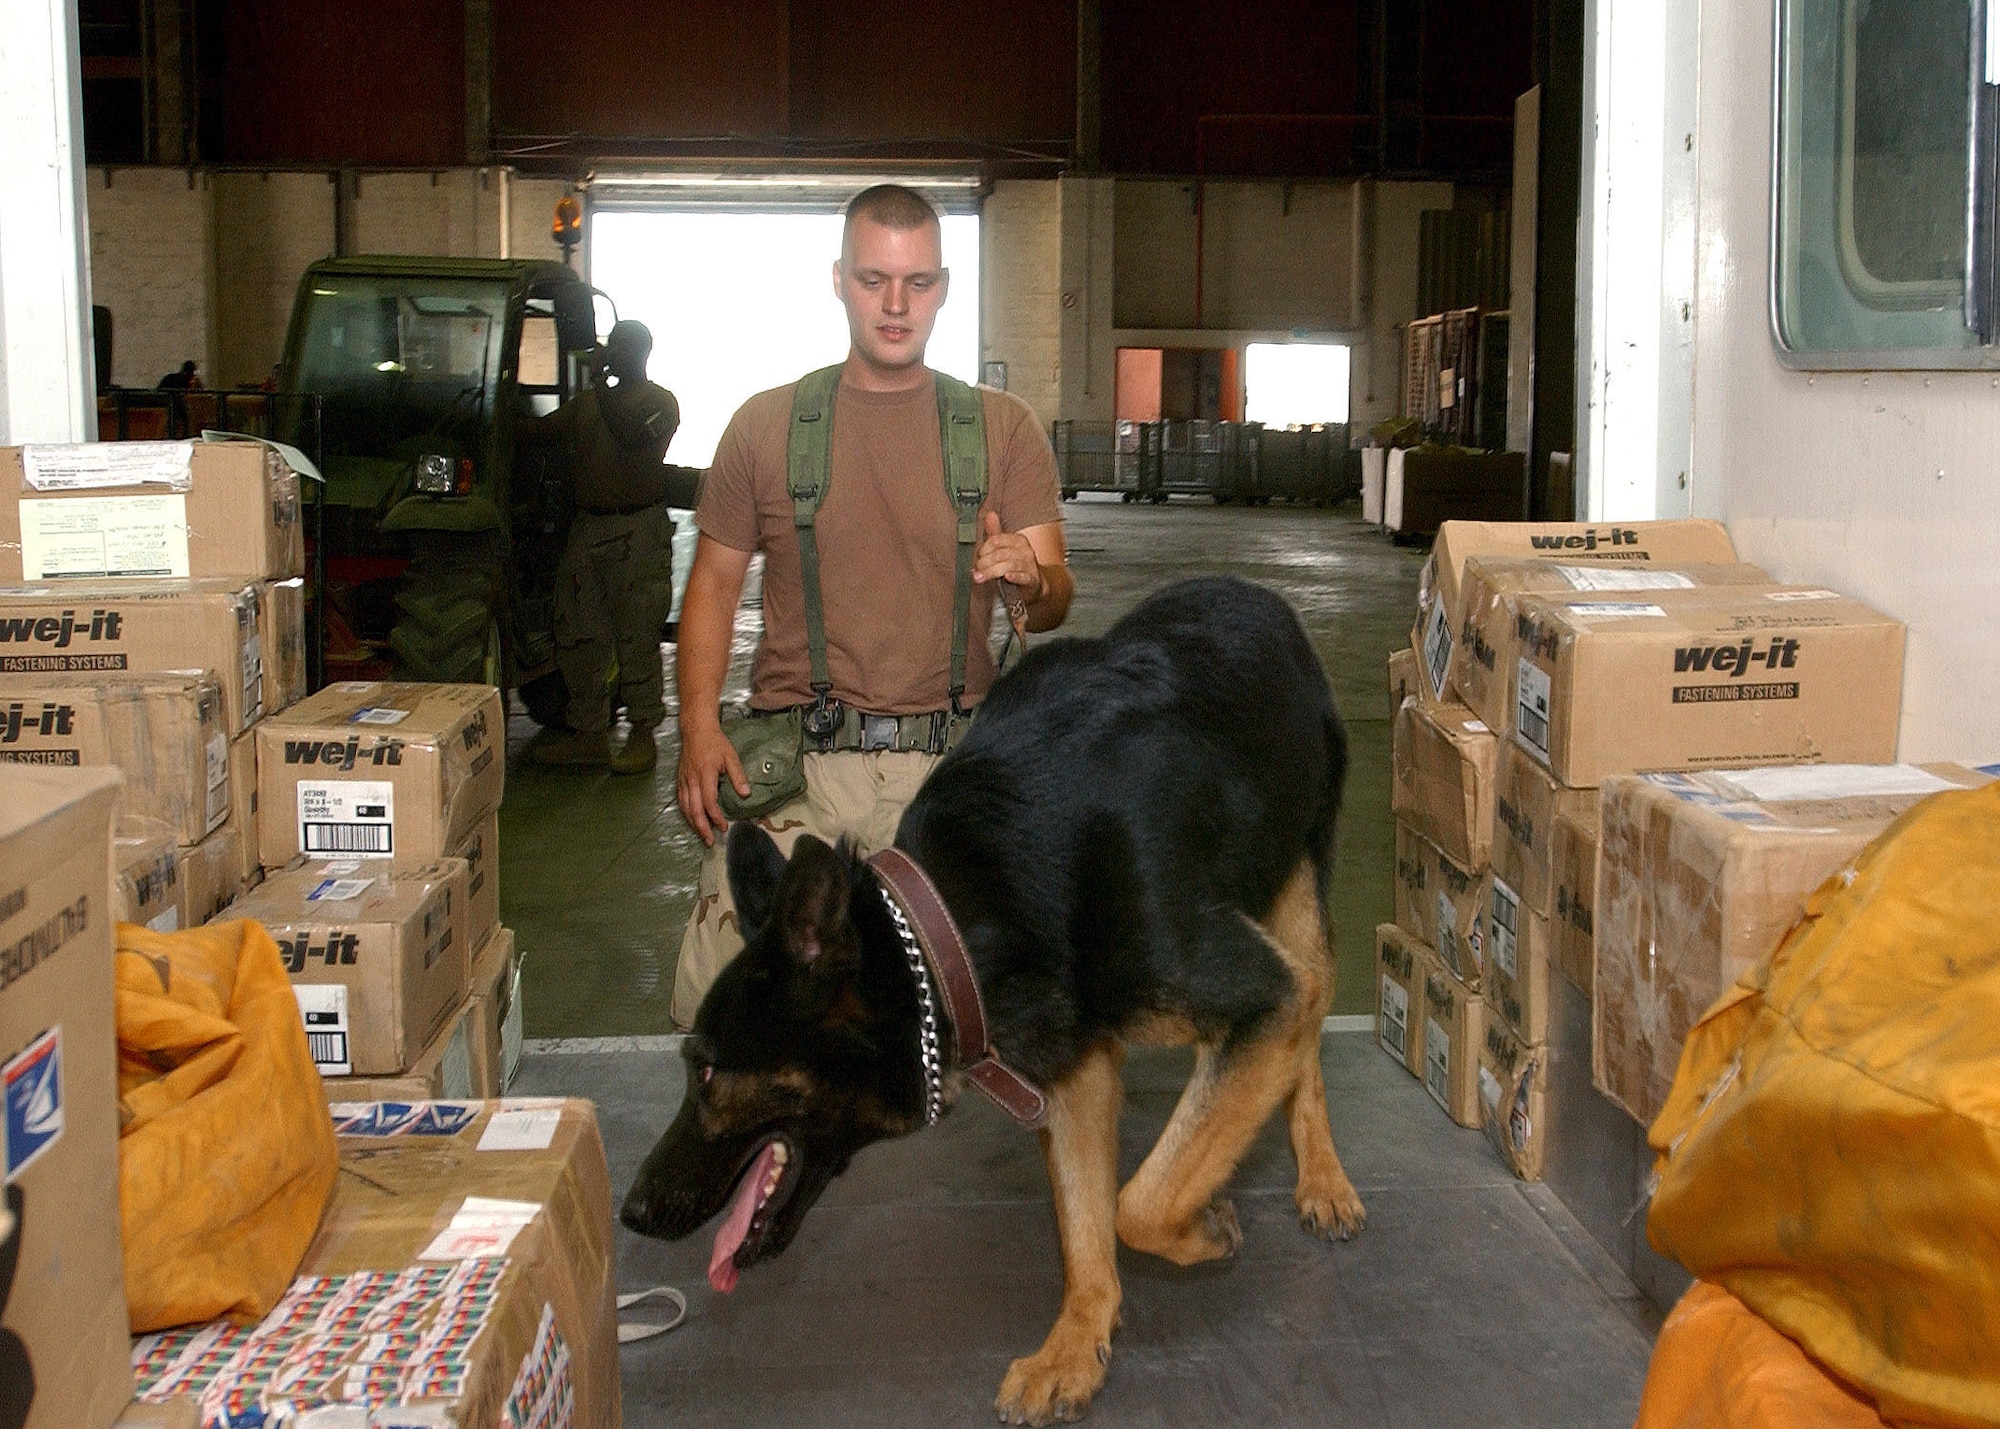 BAGHDAD, Iraq -- Staff Sgt. Dan Hartley, 447th Expeditionary Security Forces Squadron military working dog handler, and military working dog, Cody, check for explosives among boxes of mail received at Baghdad International Airport.  They are one of several military working dog teams here supporting Operation Iraqi Freedom.  Hartley and Cody are both deployed from the 66th Security Forces Squadron at Hanscom Air Force Base, Mass.  (U.S. Air Force photo by Airman 1st Class Brian Ferguson)